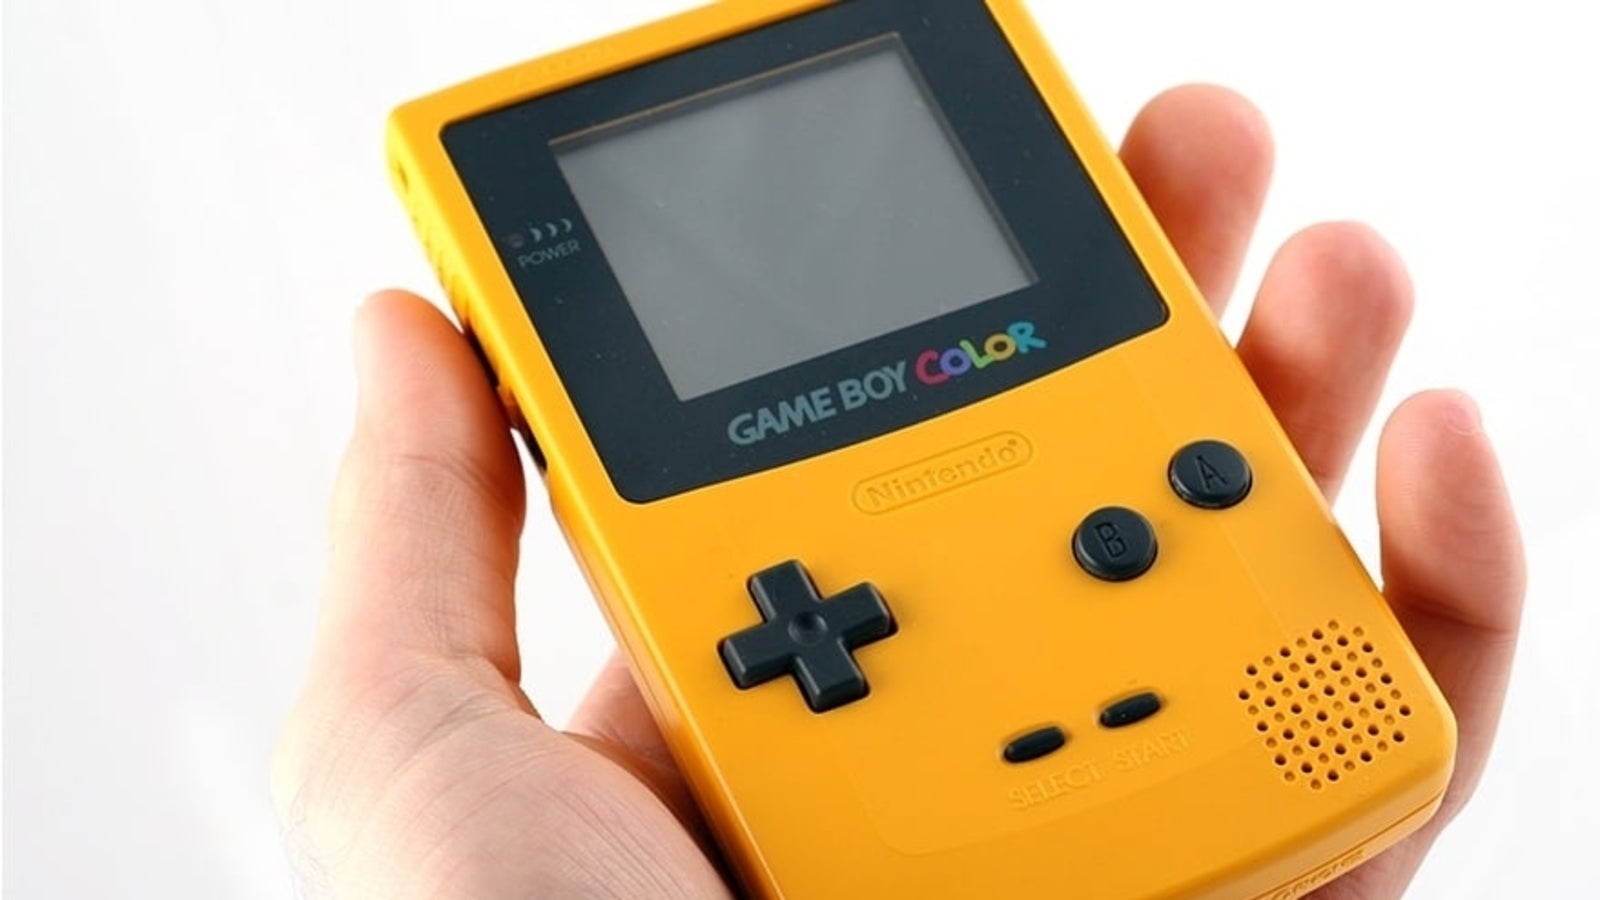 Game Boy and Game Boy Color alts headed to Nintendo Switch